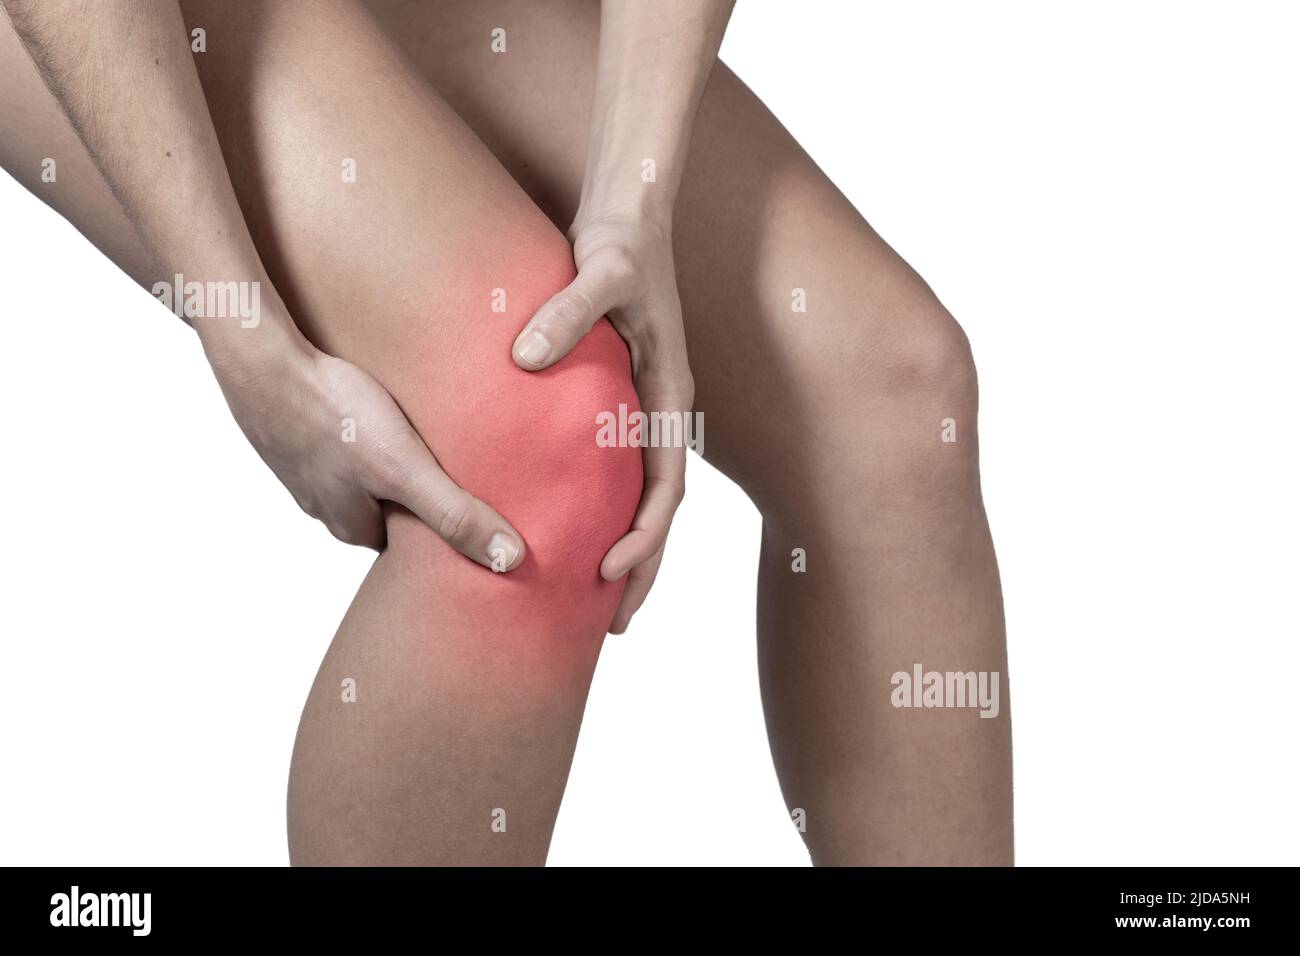 Knee pain with hands covering it. Lateral view Stock Photo